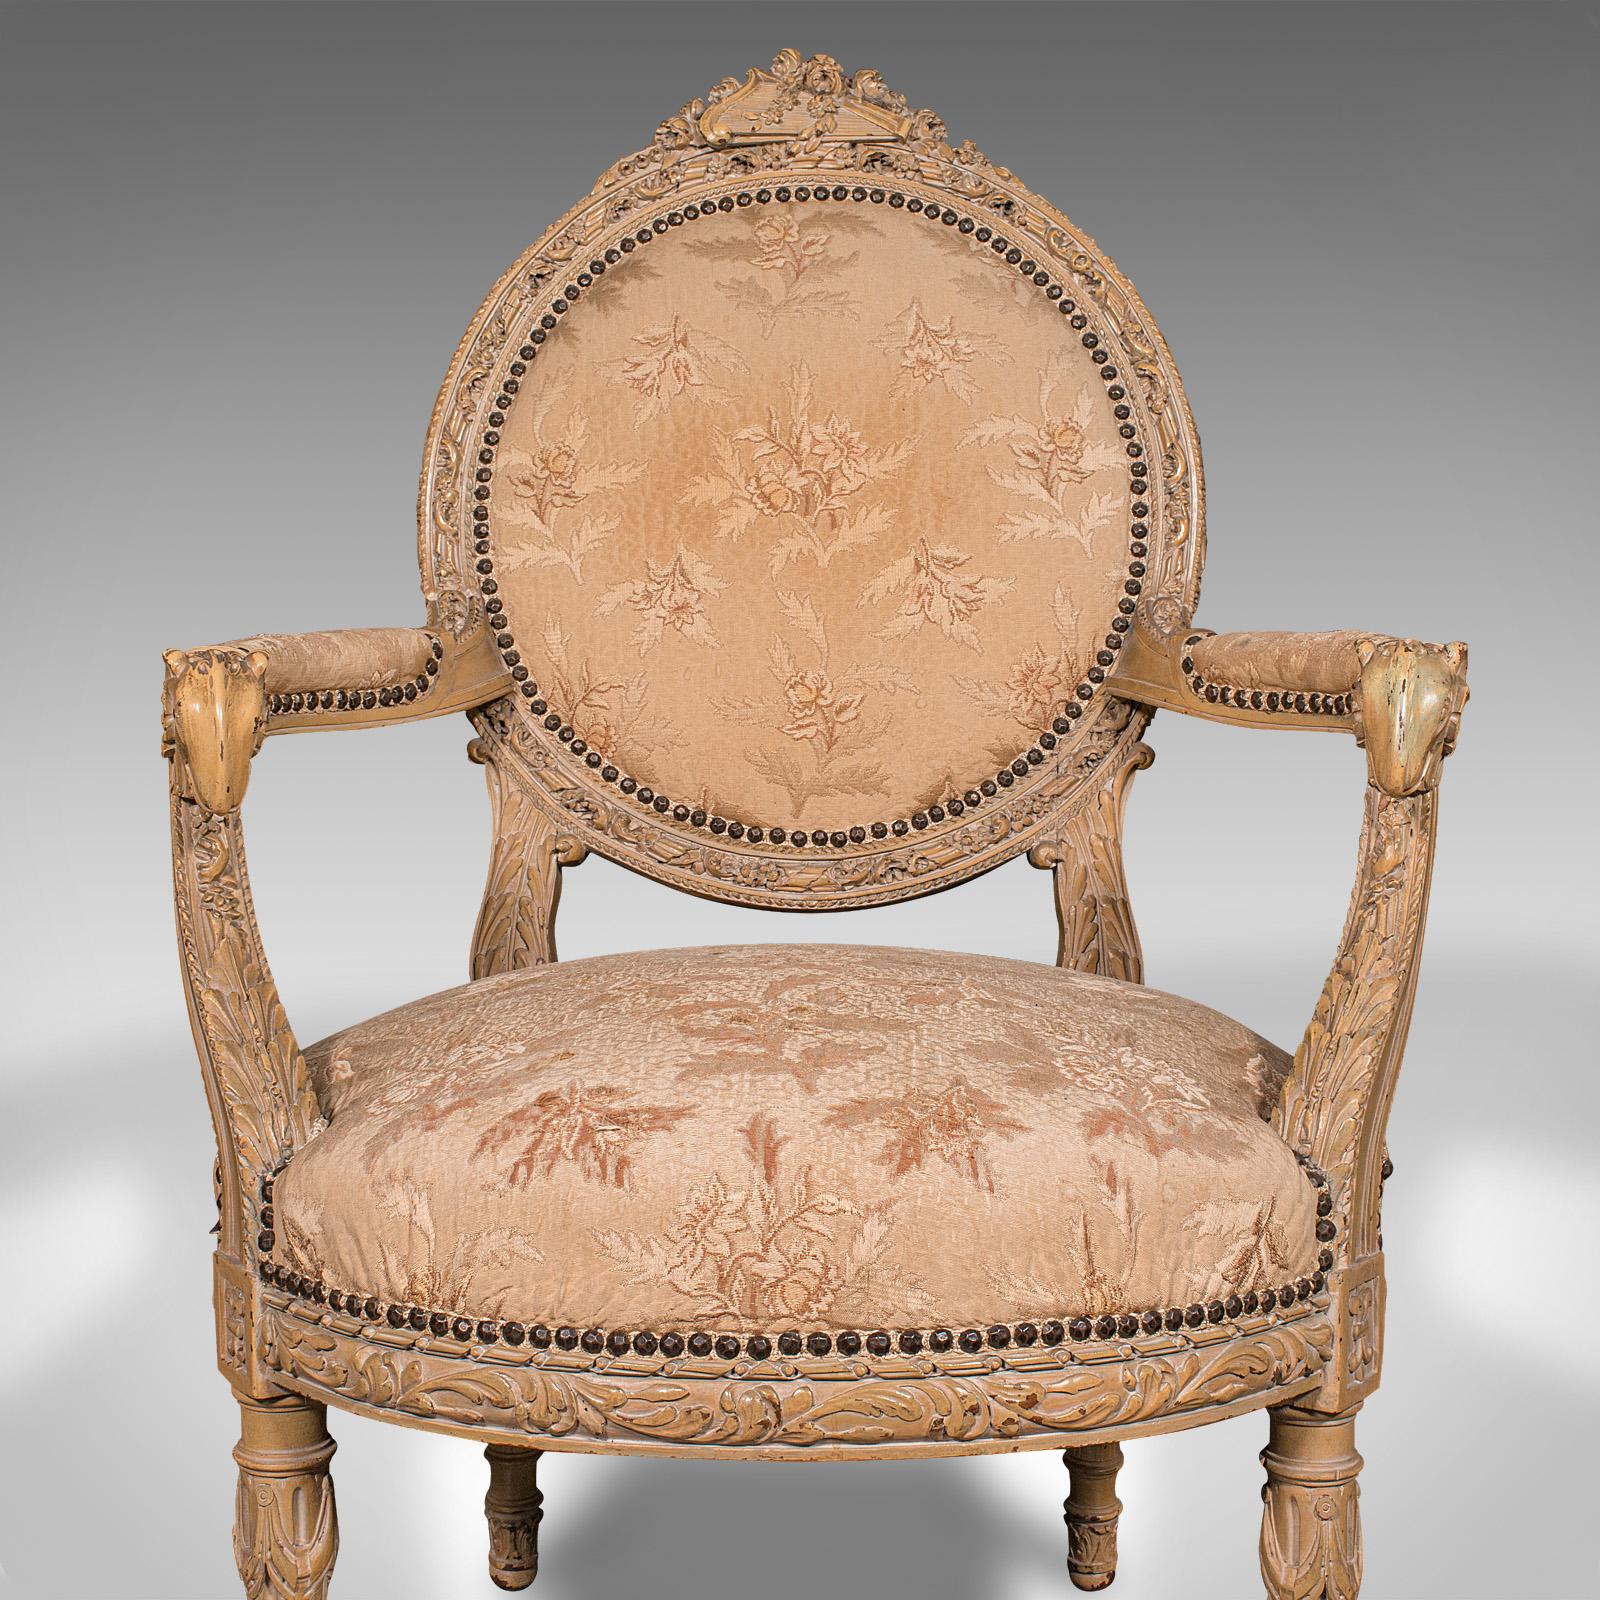 Antique Carved Armchair, French, Show Frame, Fauteuil Chair, Victorian, C.1870 For Sale 2